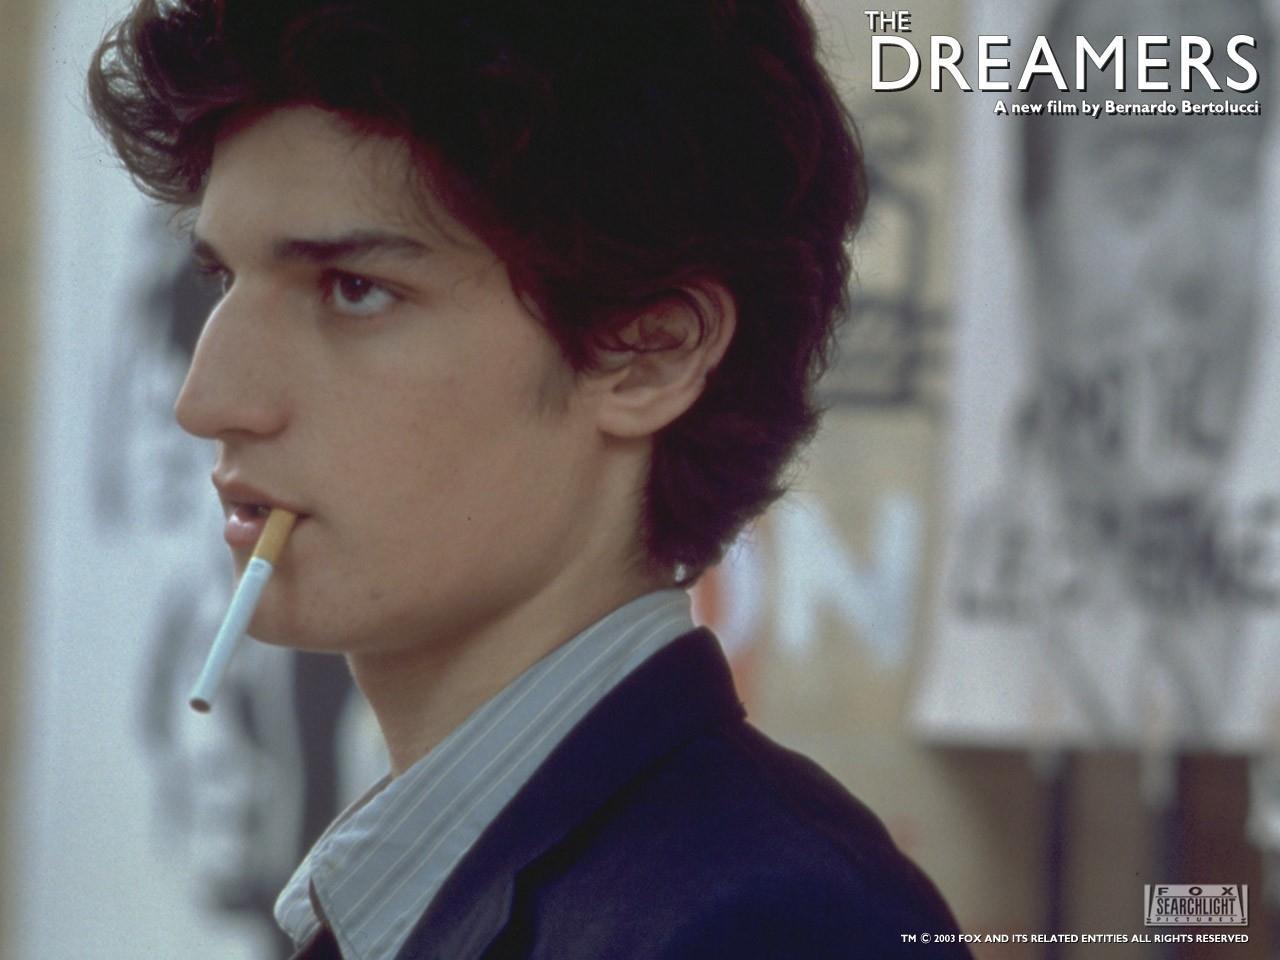 Image gallery for The Dreamers - FilmAffinity